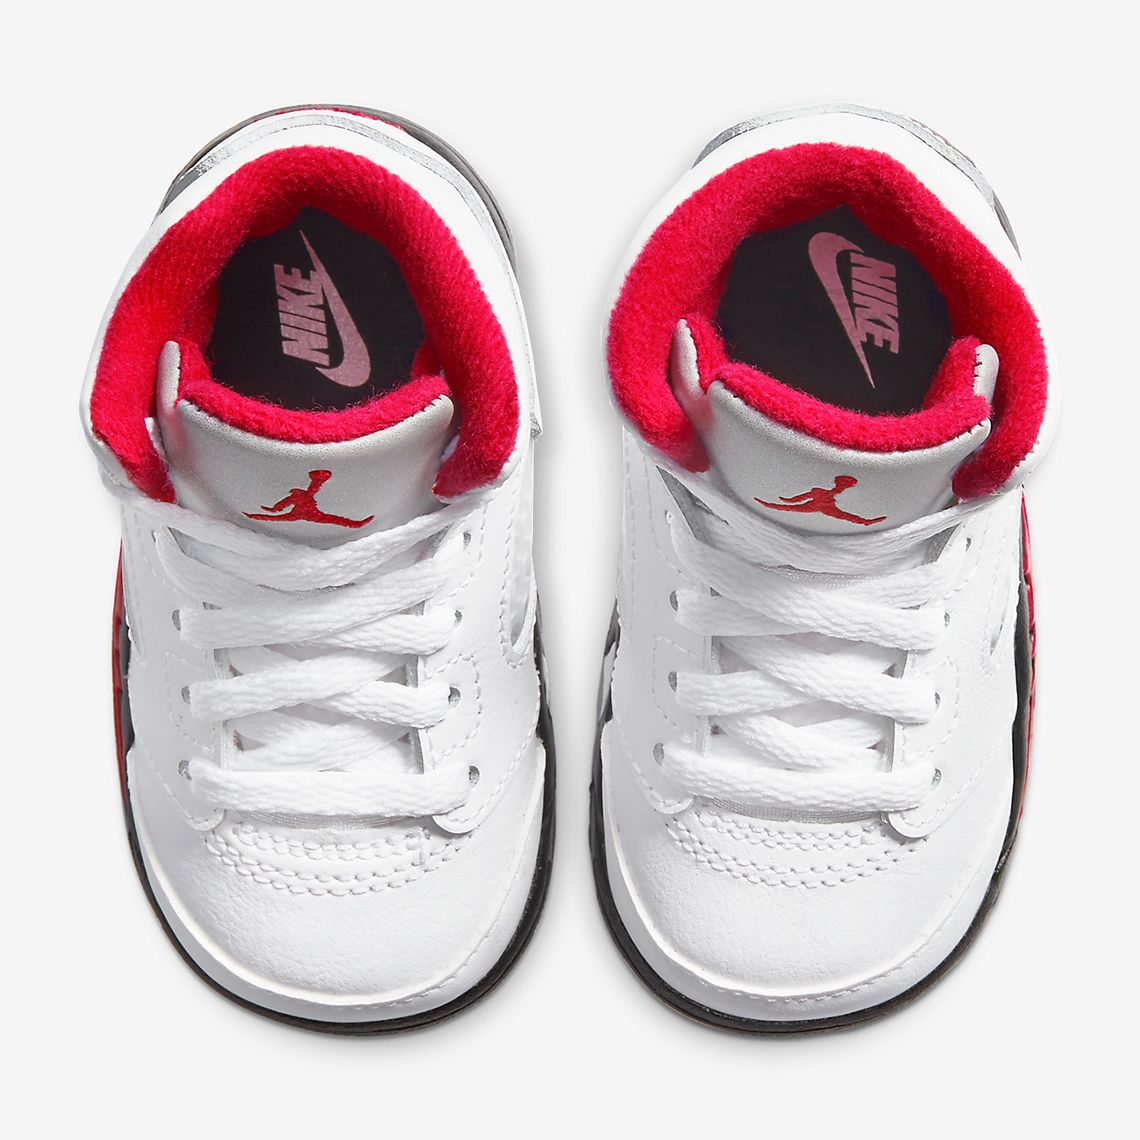 WINGS for the Jordan Brand 8×8 Collection Fire Red Infant 440890 102 5